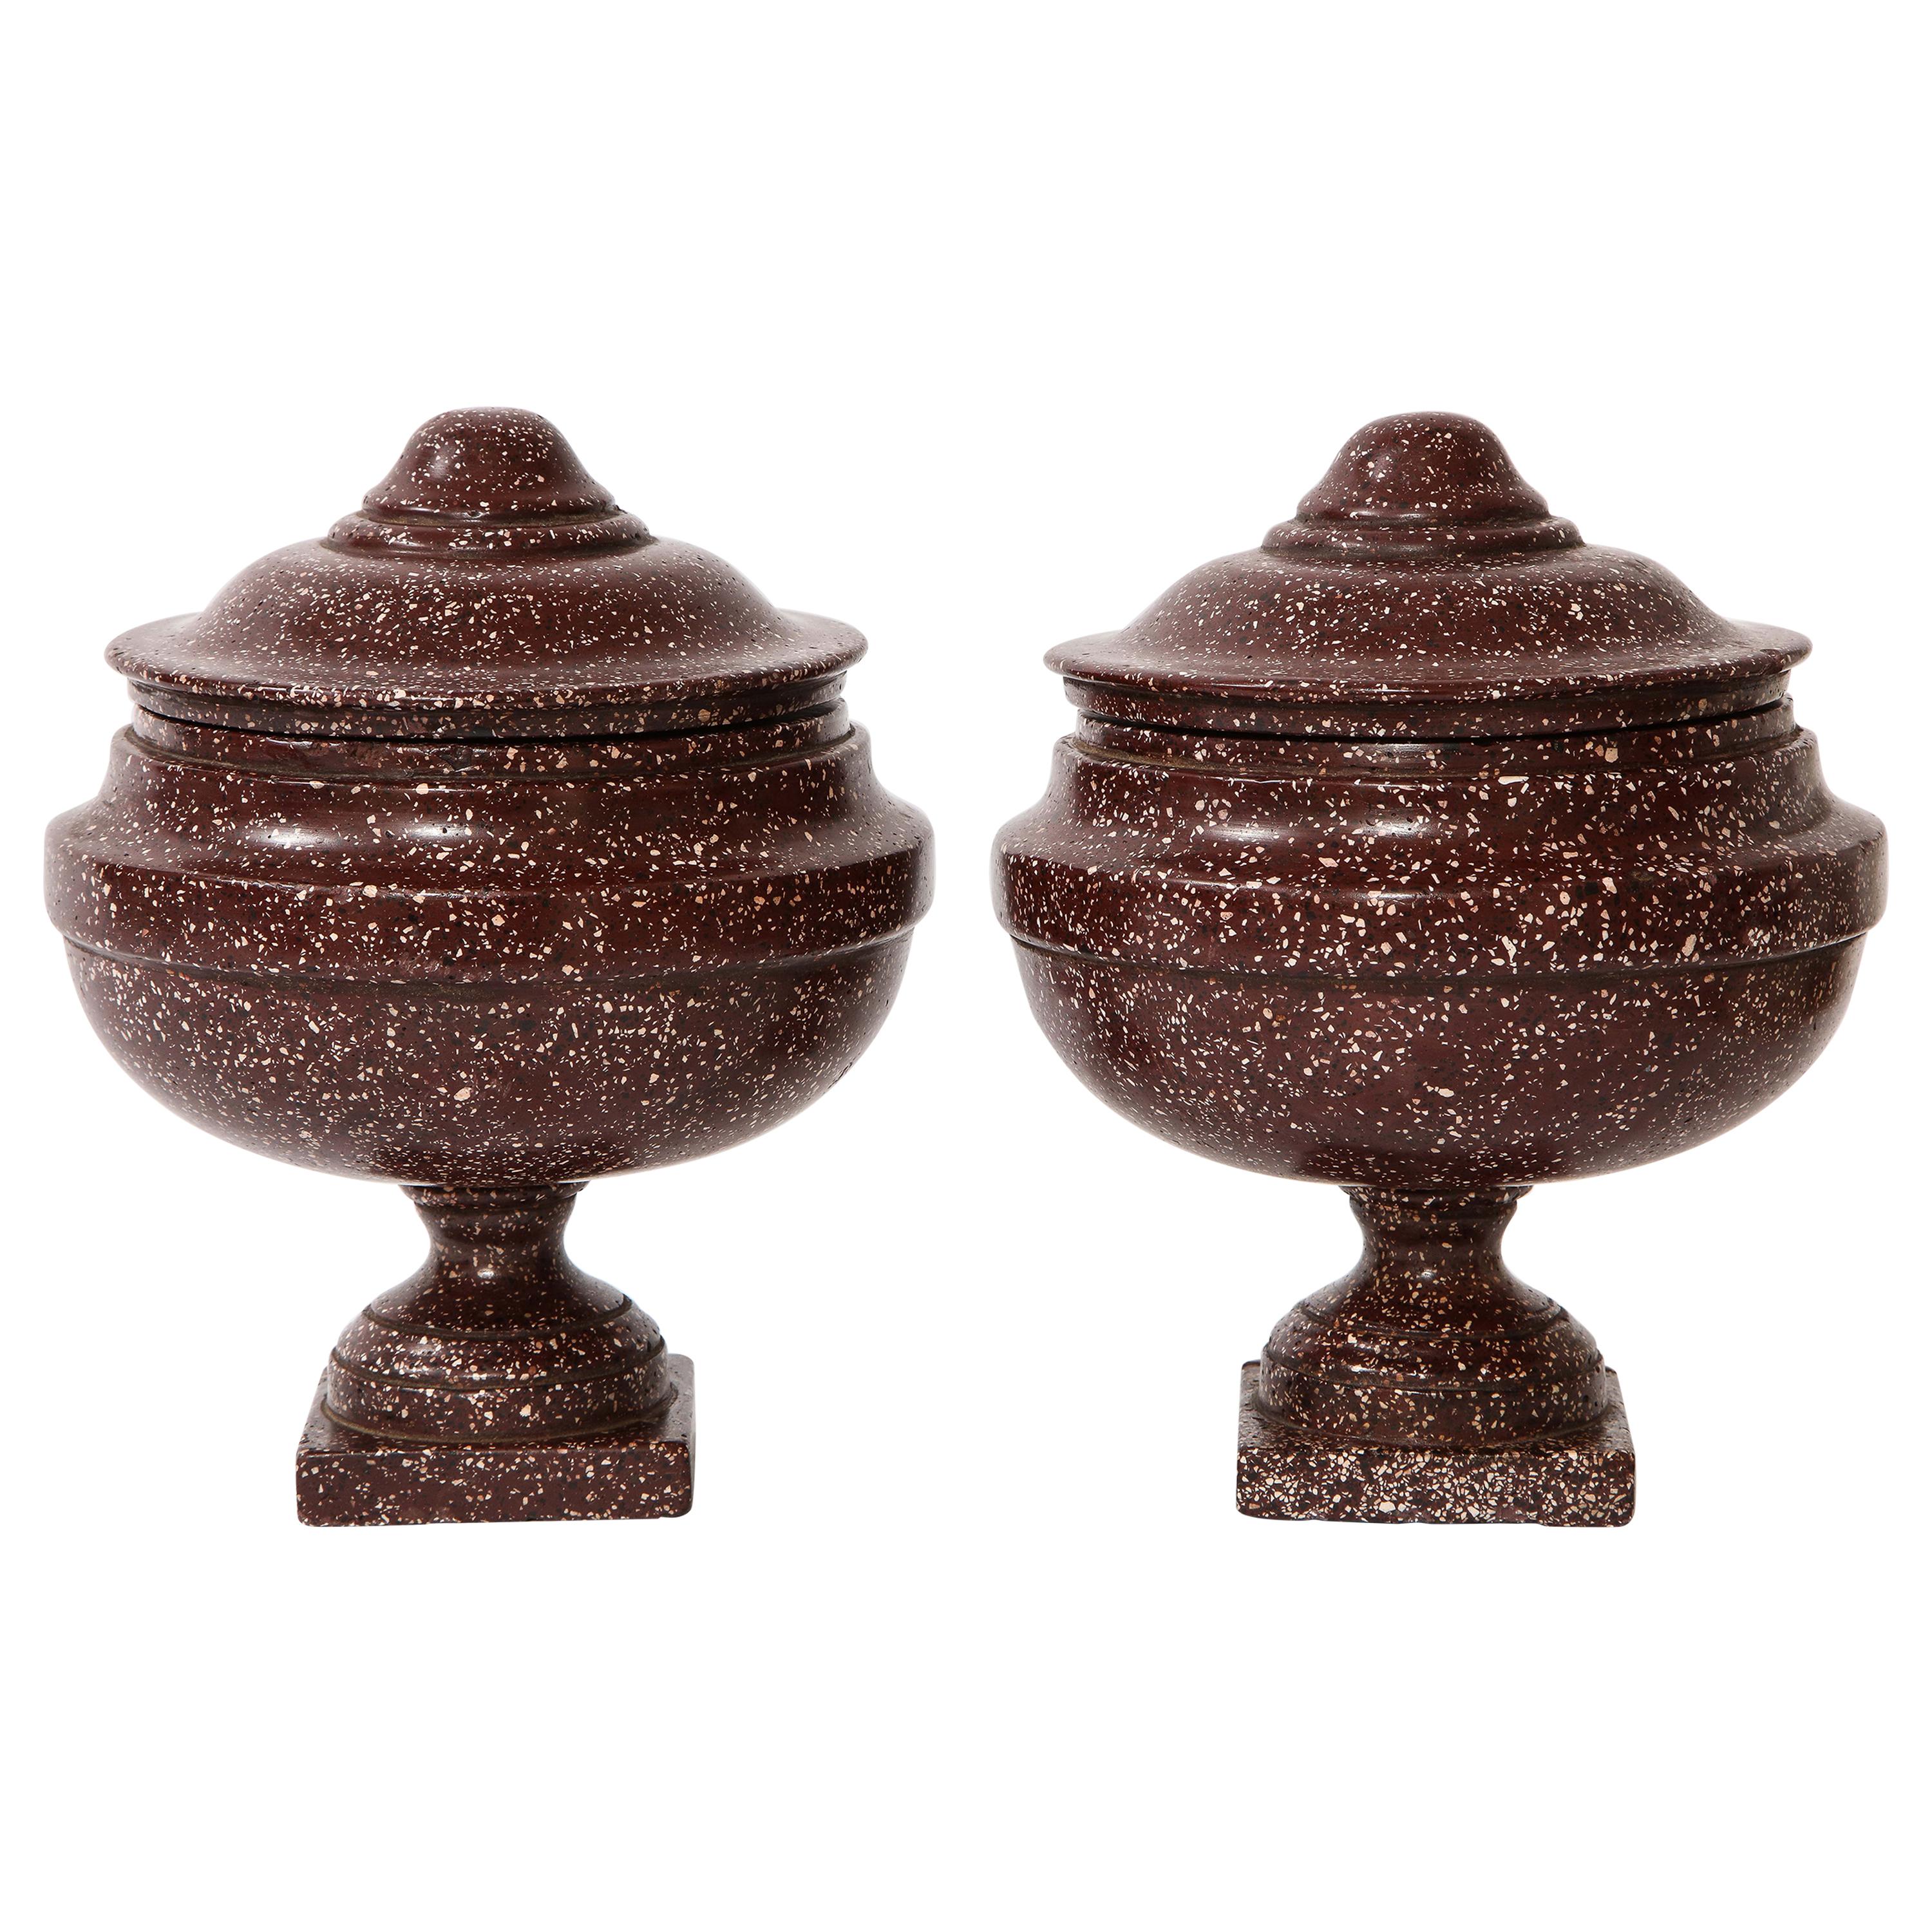 Pair of Antique Roman Porphyry, Grand Tour Period Hand-Carved Lidded Vases